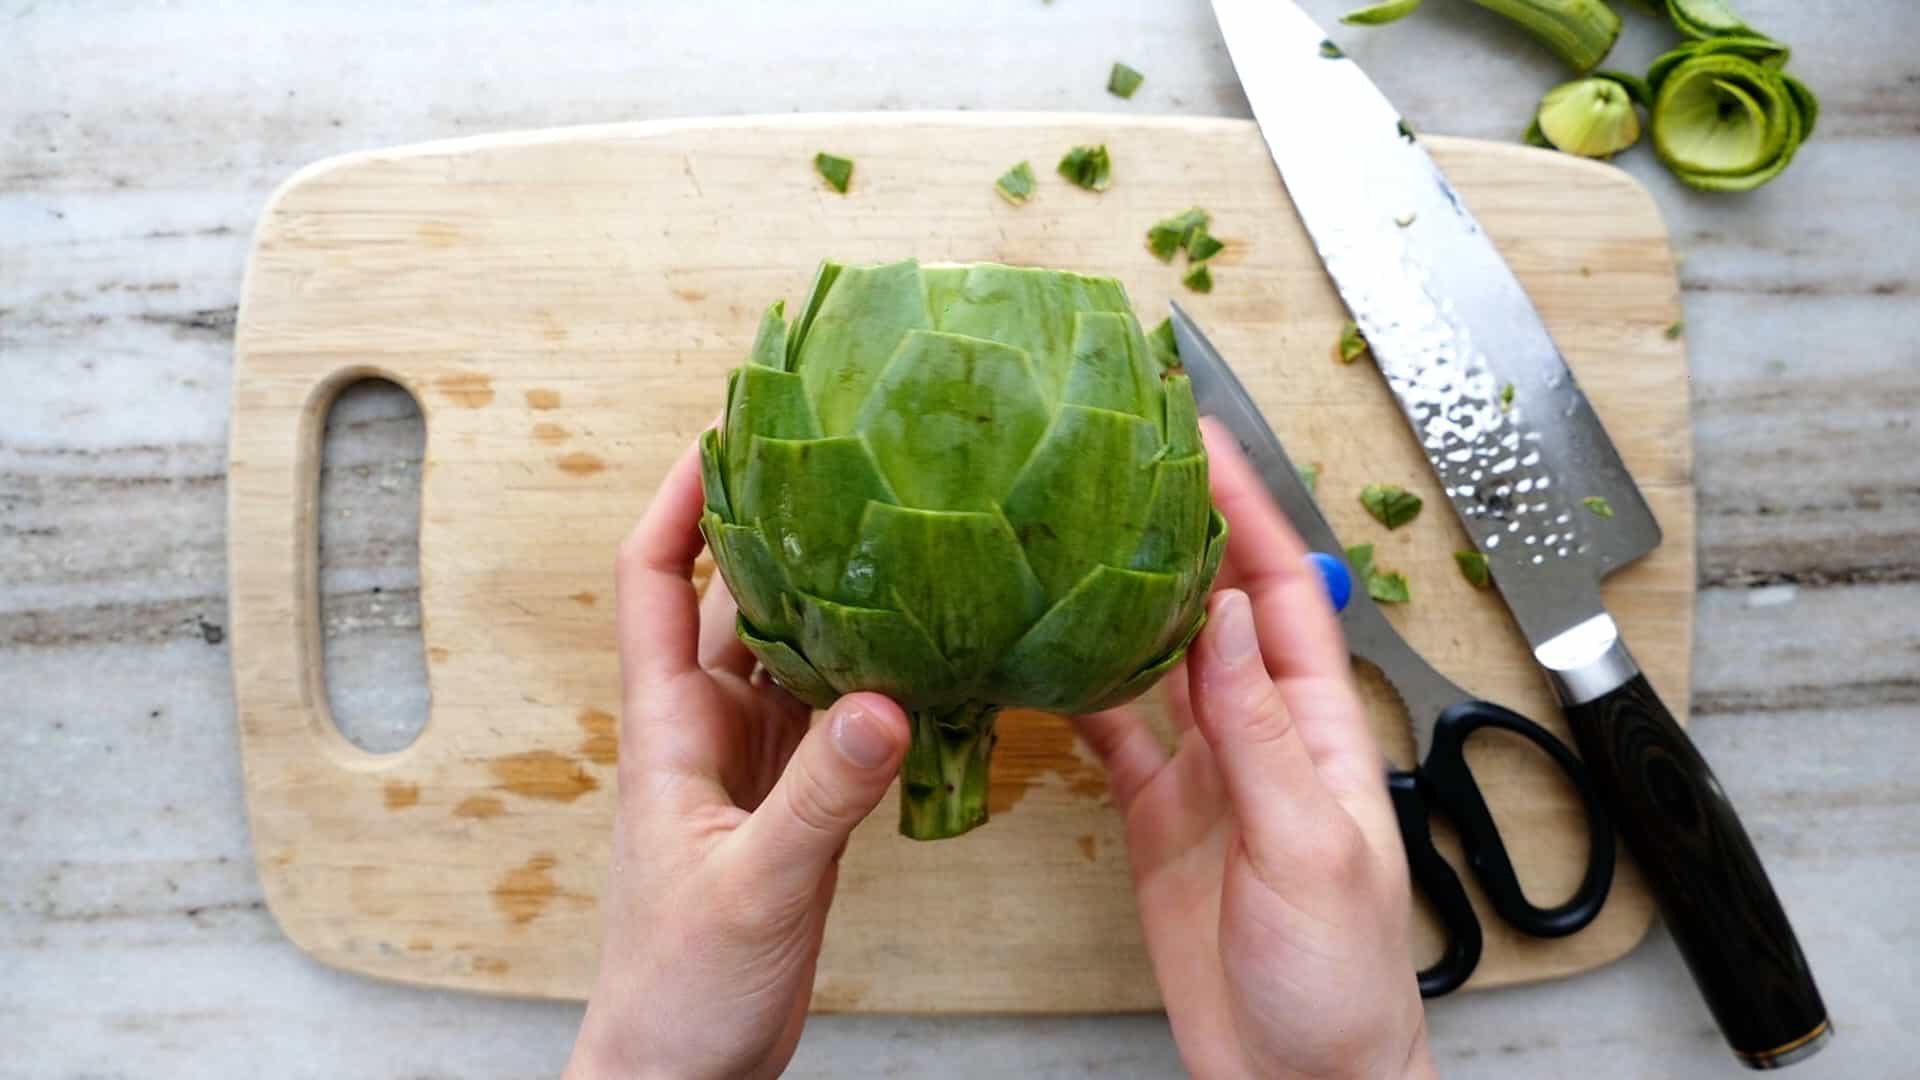 woman's hands holding up a trimmed artichoke over a cutting board